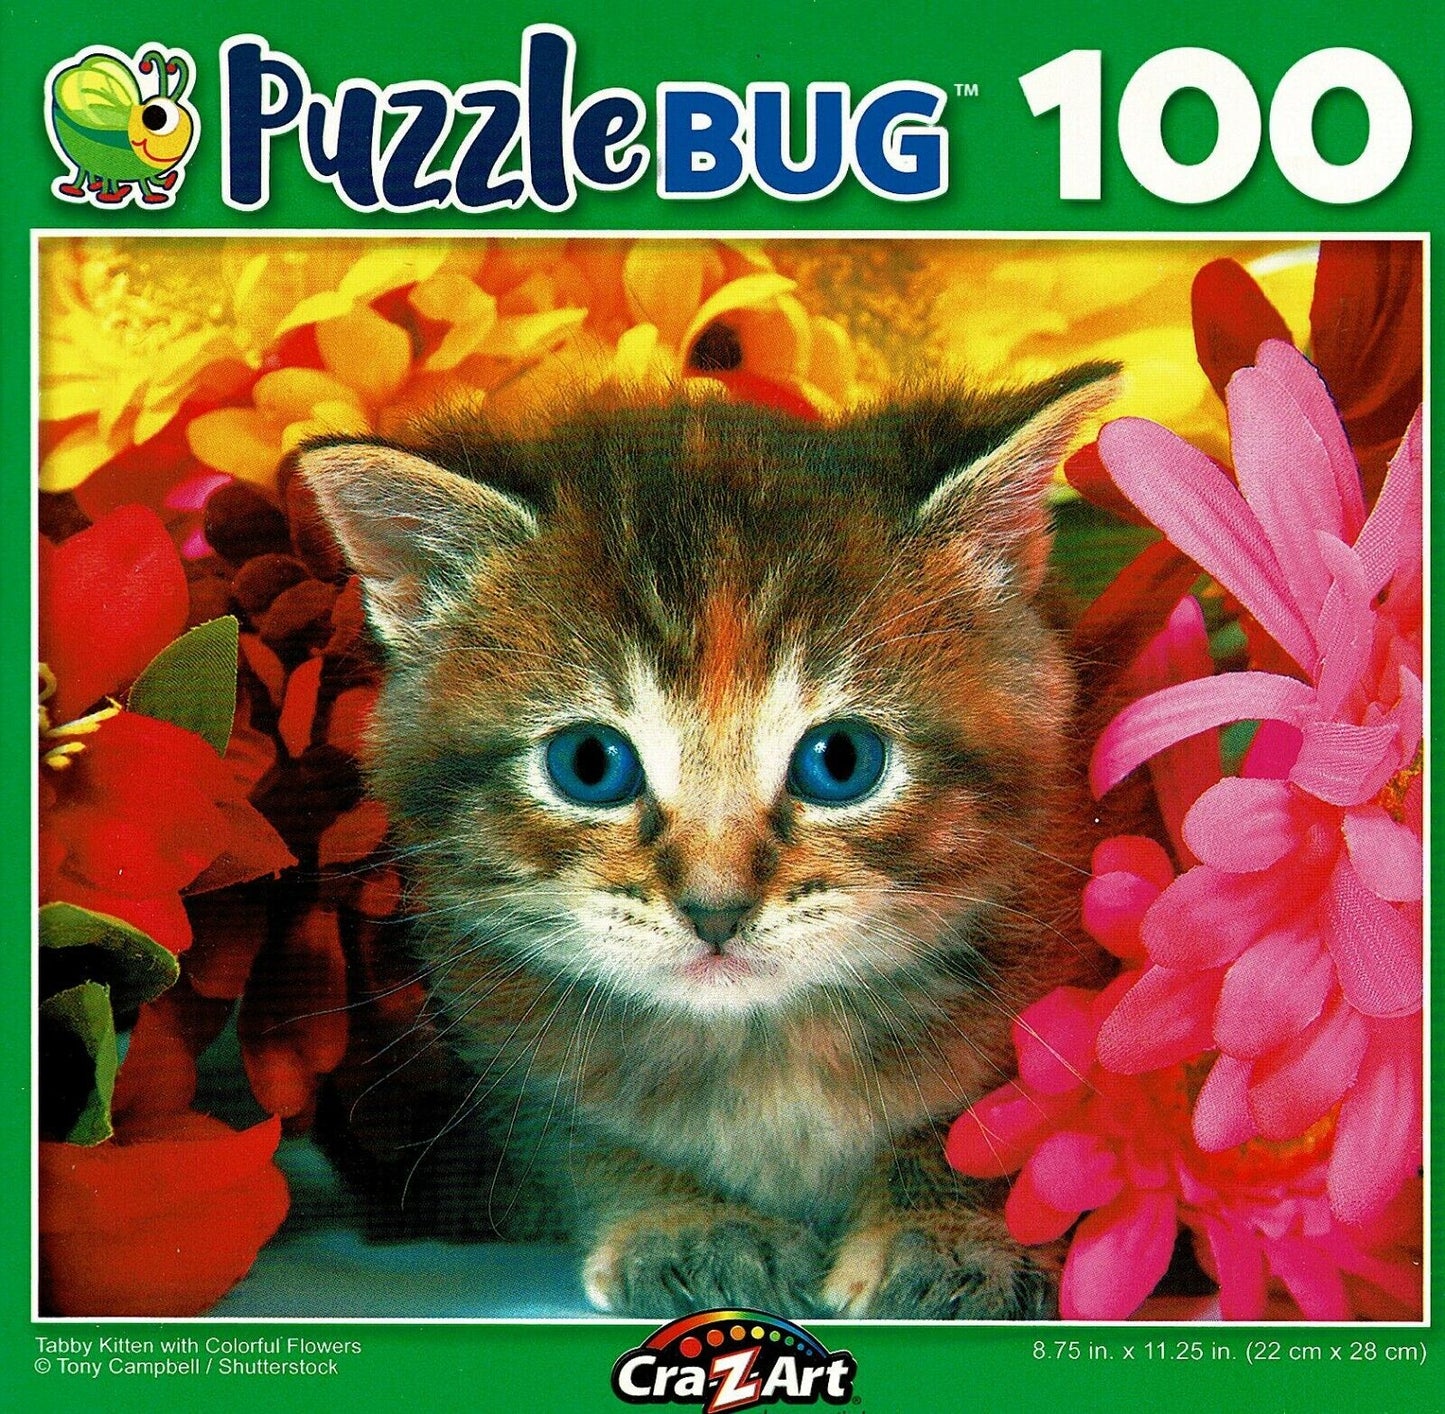 Tabby Kitten with Colorful Flowers - 100 Pieces Jigsaw Puzzle